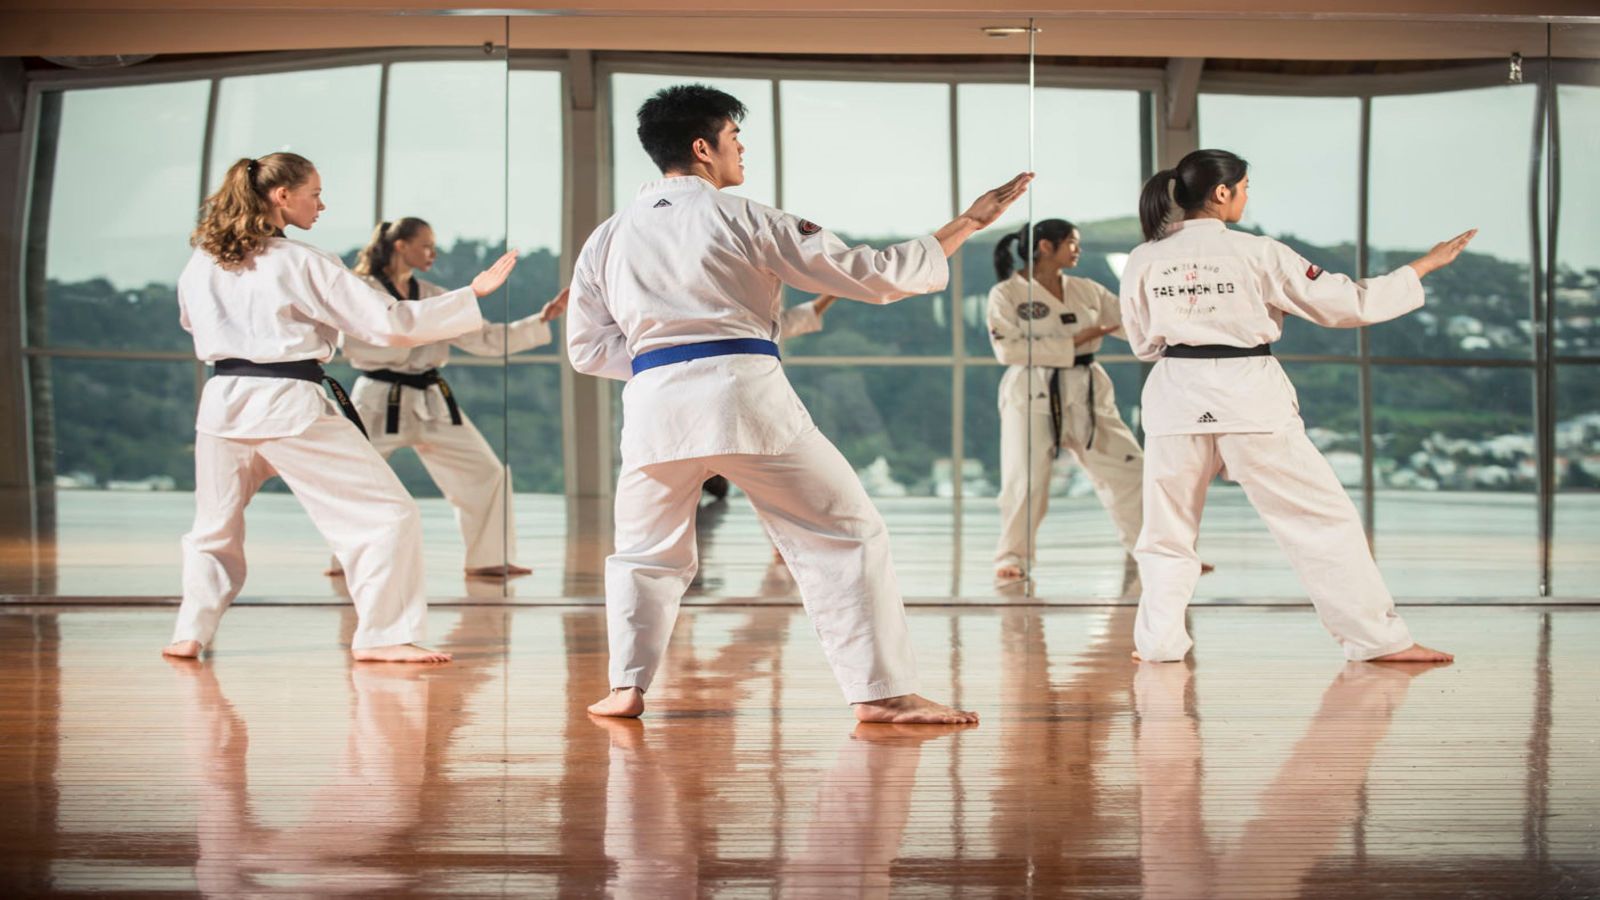 Three students standing in front of window during taekwondo training